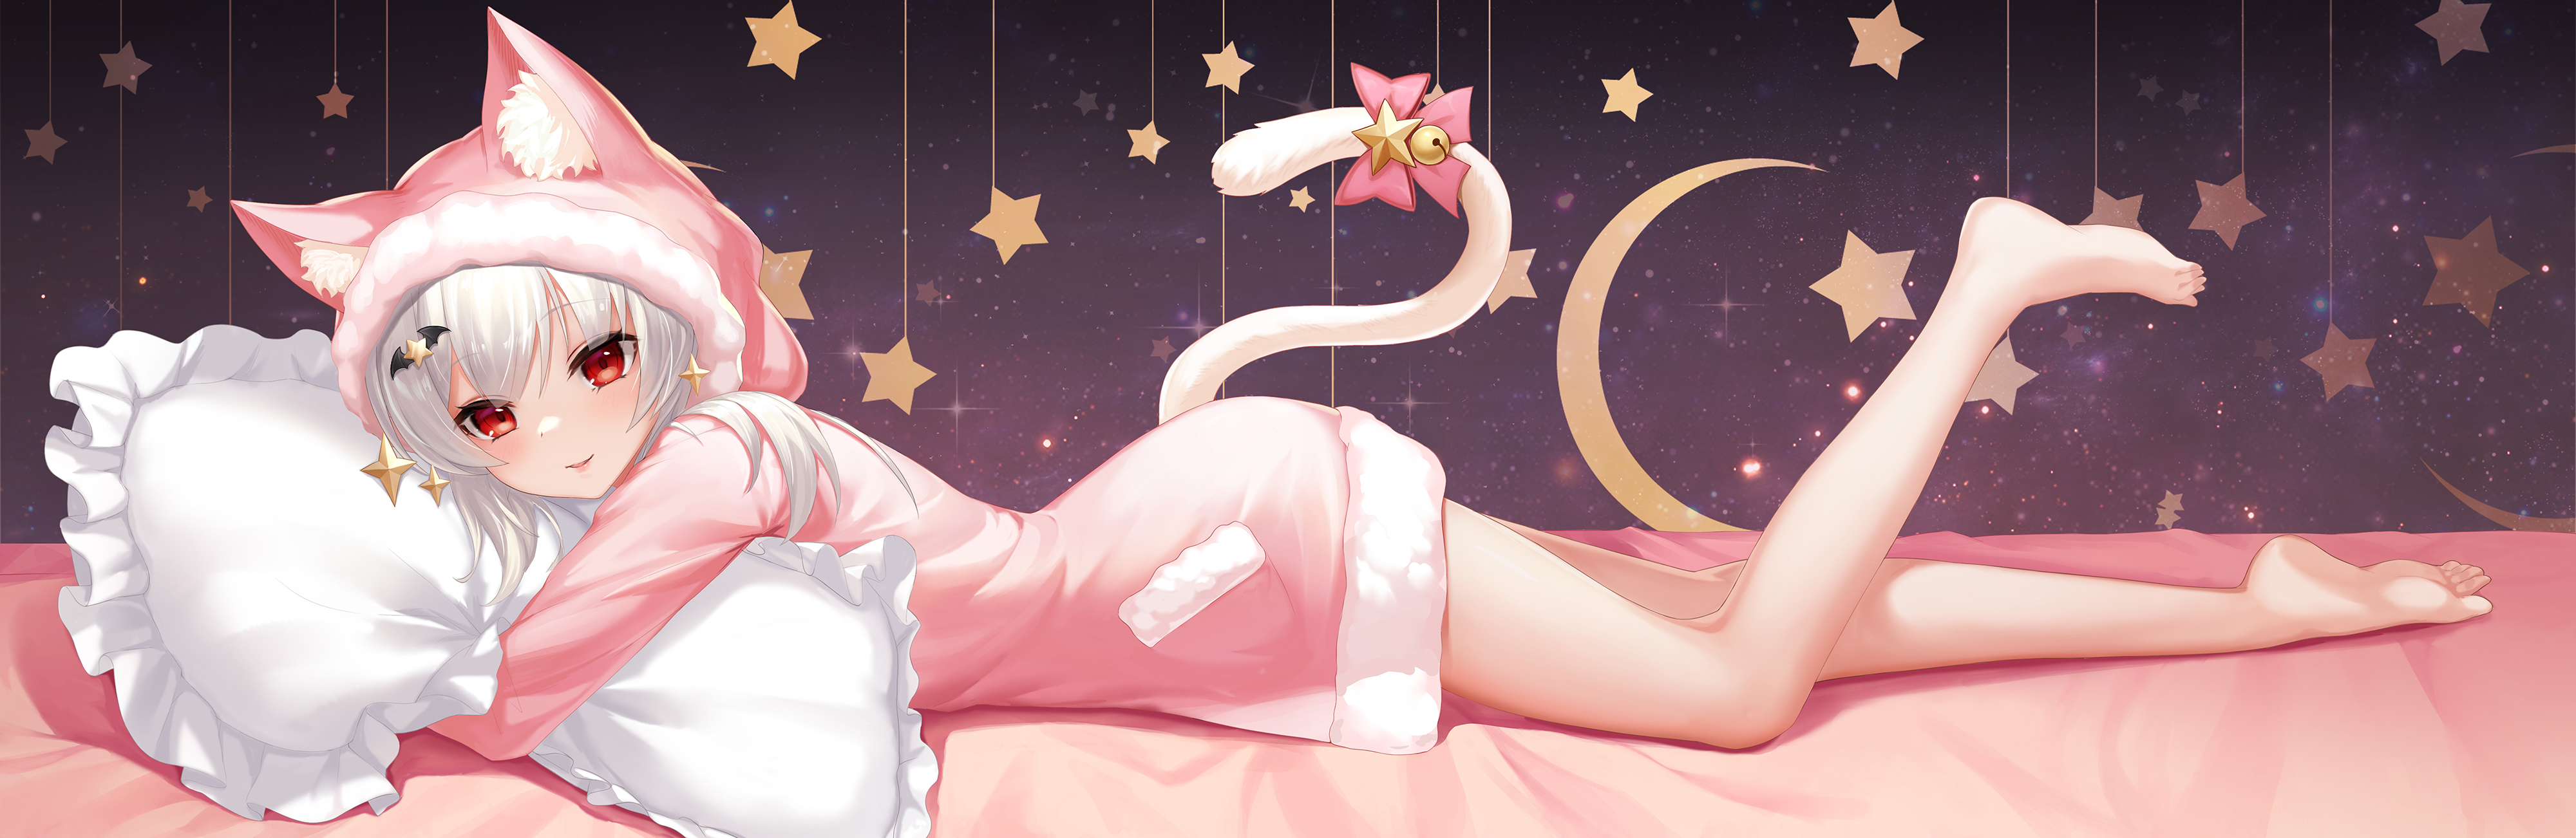 Anime 4000x1302 anime anime girls Sramy original characters animal ears cat tail legs feet red eyes silver hair barefoot foot sole lying down